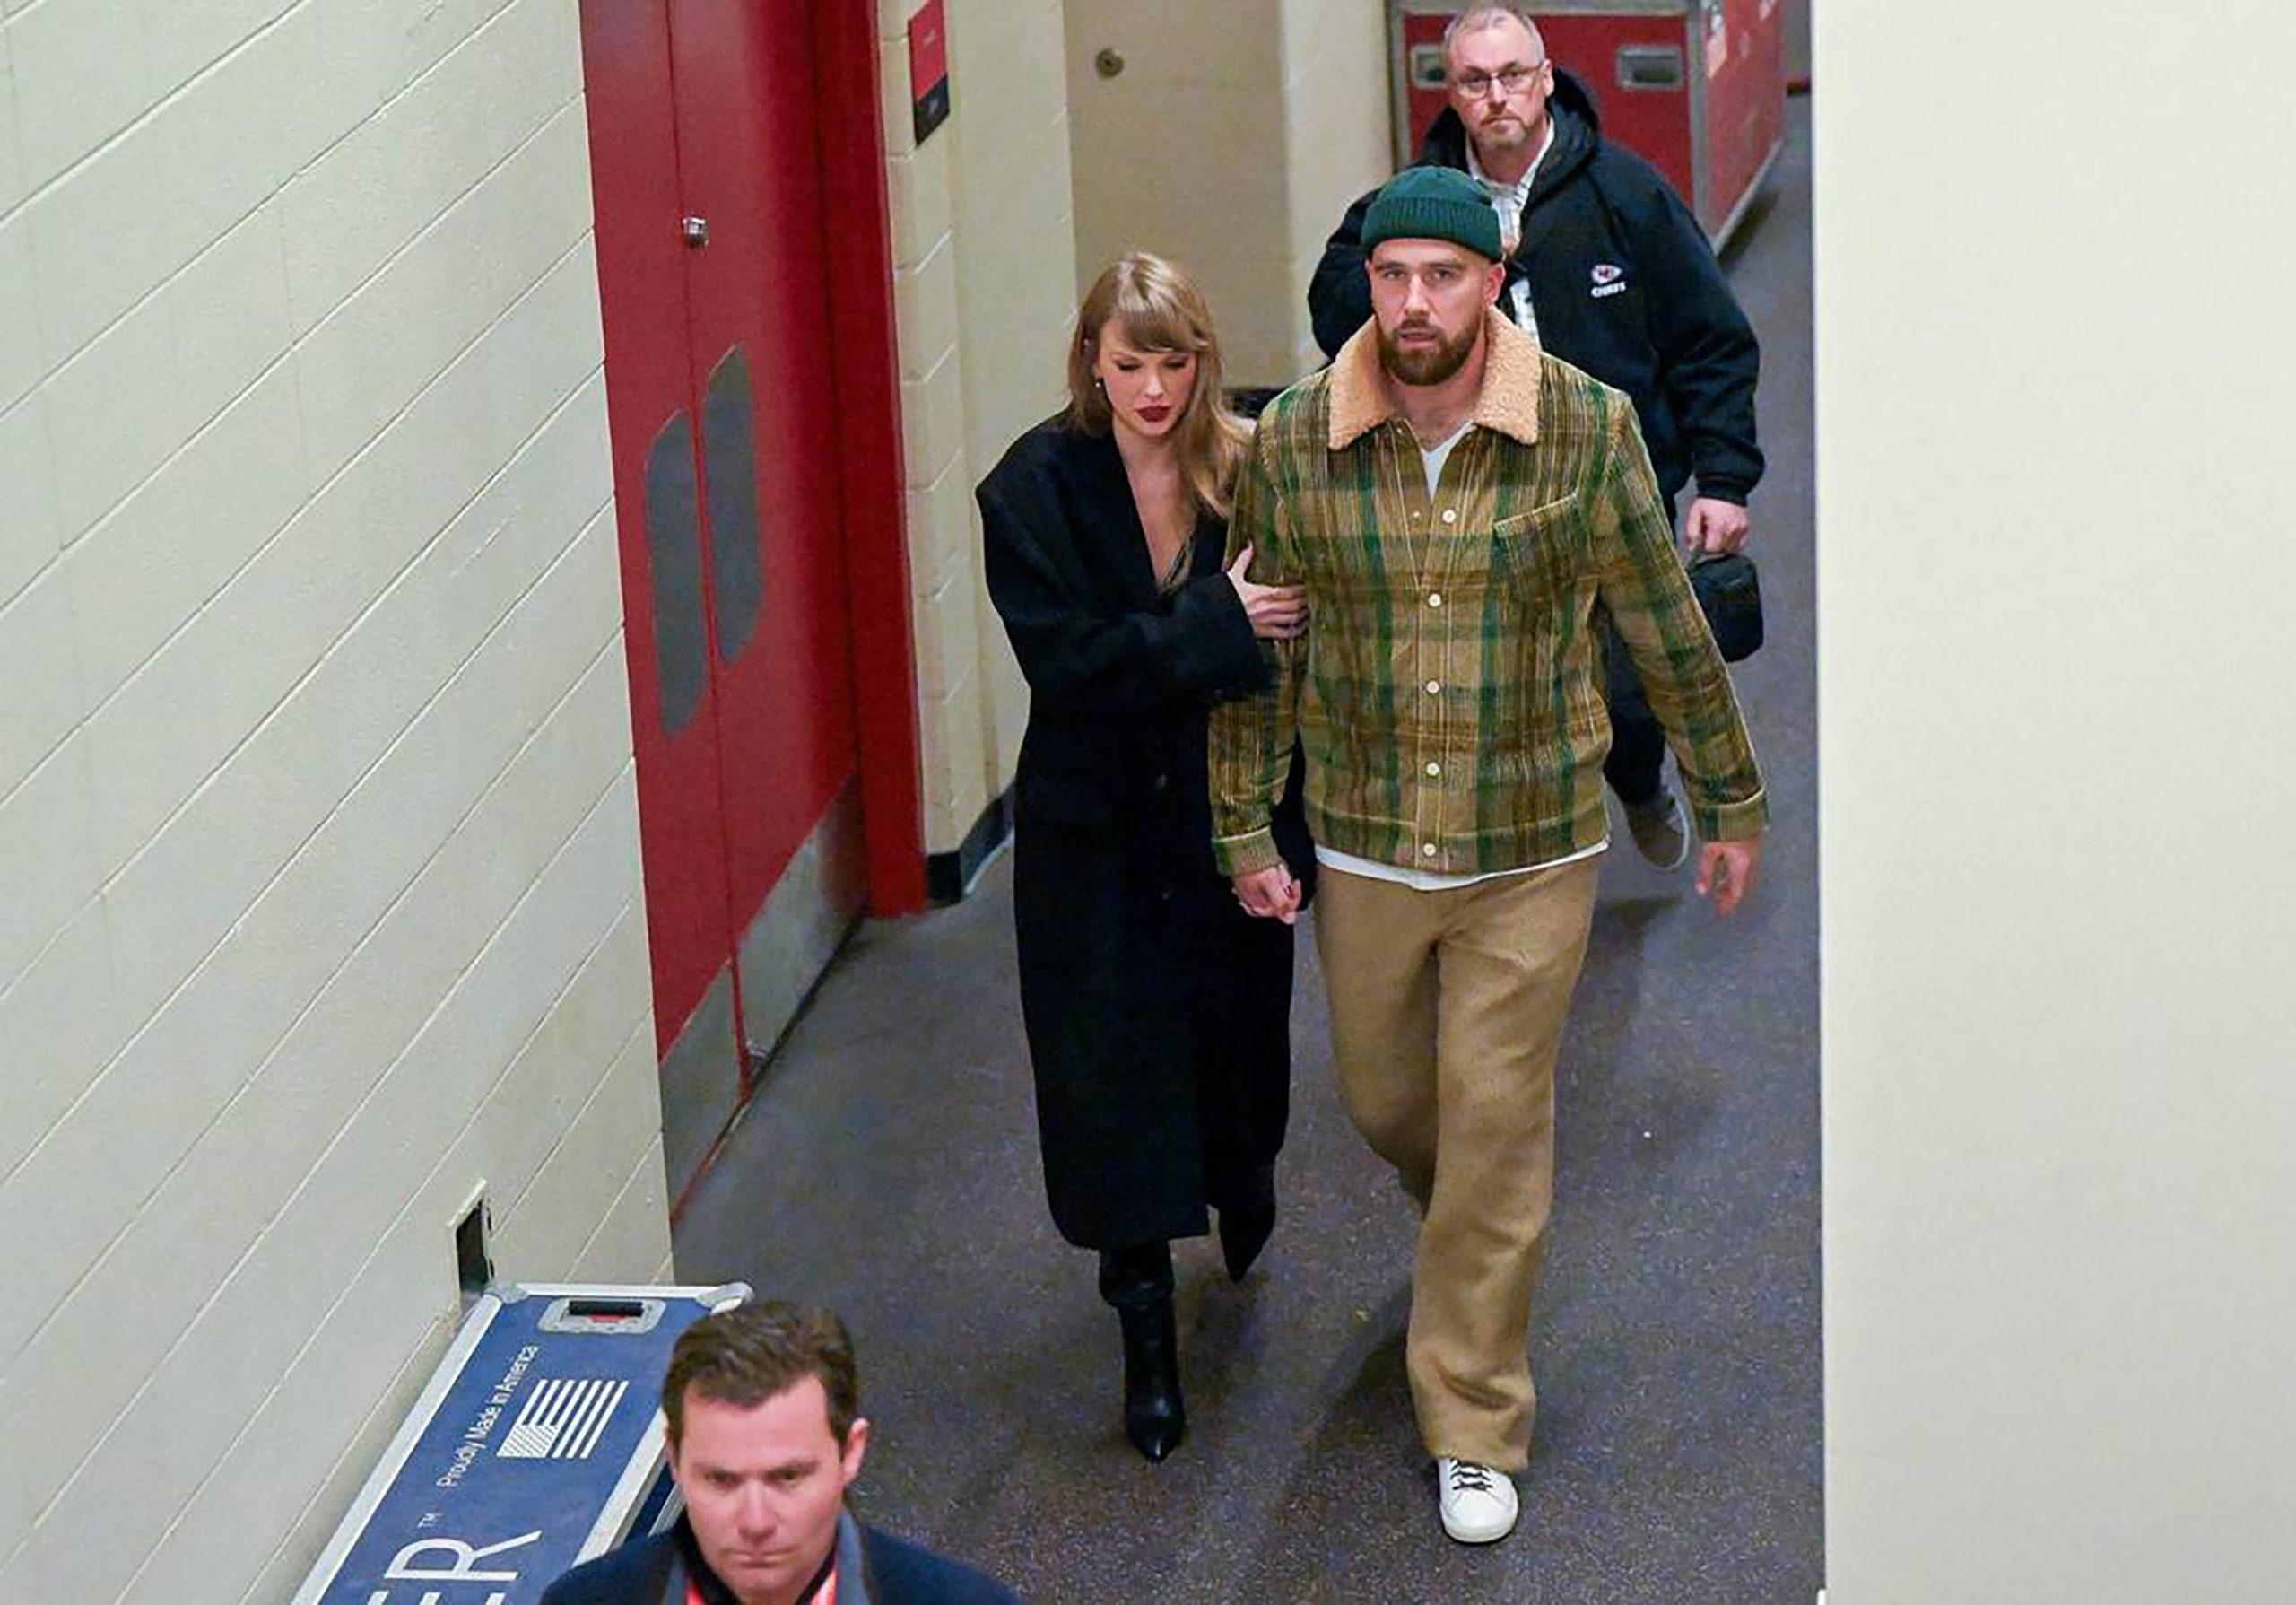 Fans predict that Swift's boyfriend, NFL star Travis Kelce, has something to do with the mark